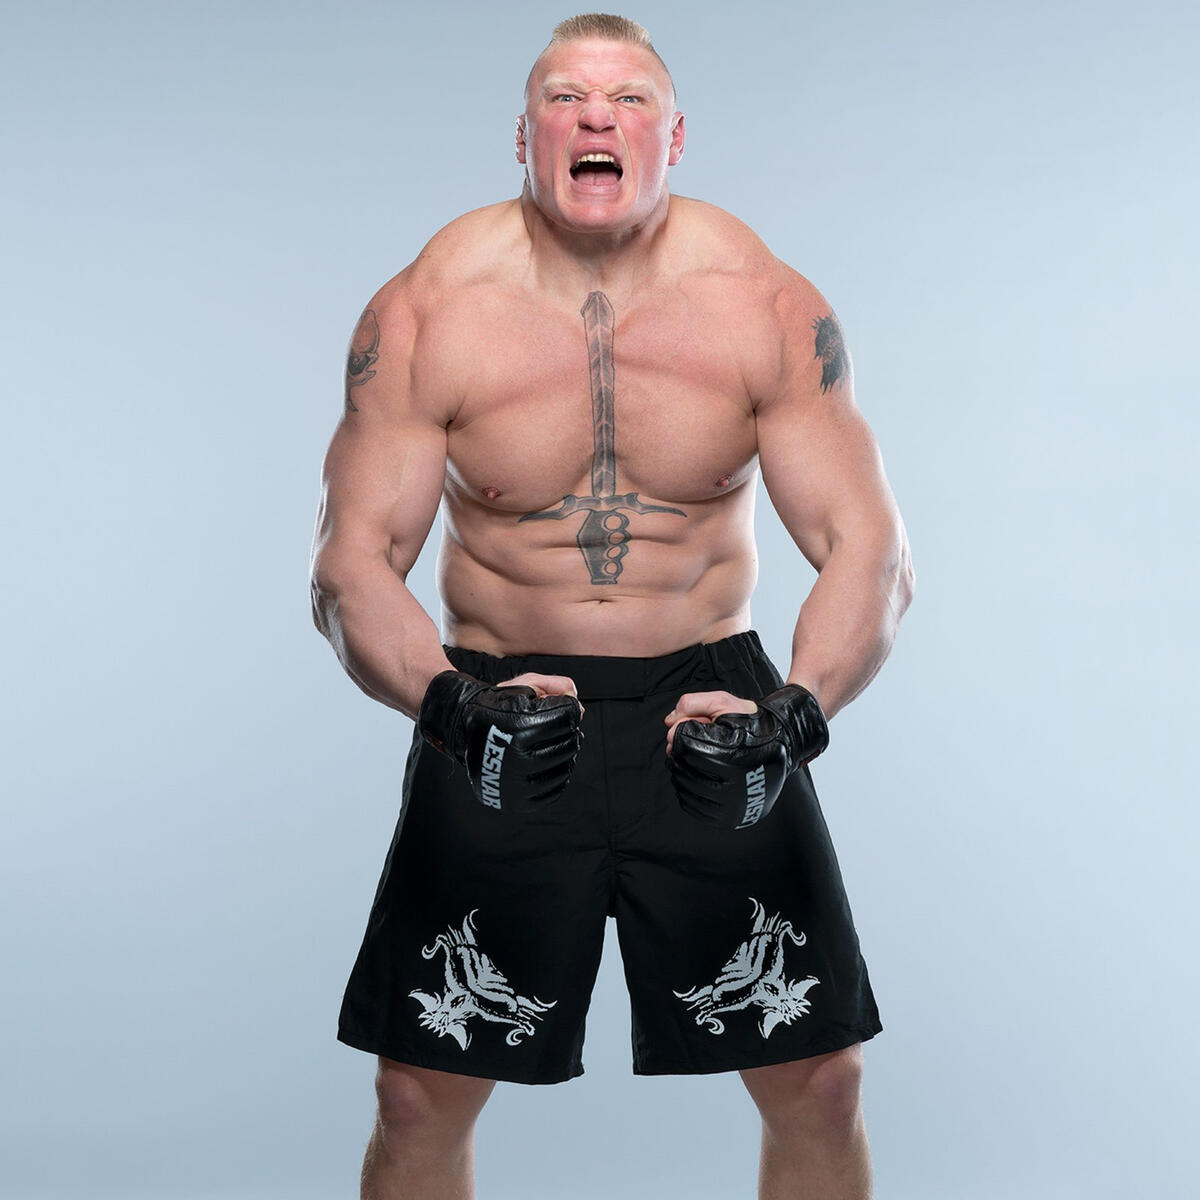 Universal Champion Brock Lesnar's first WWE photo shoot in more than two years WWE